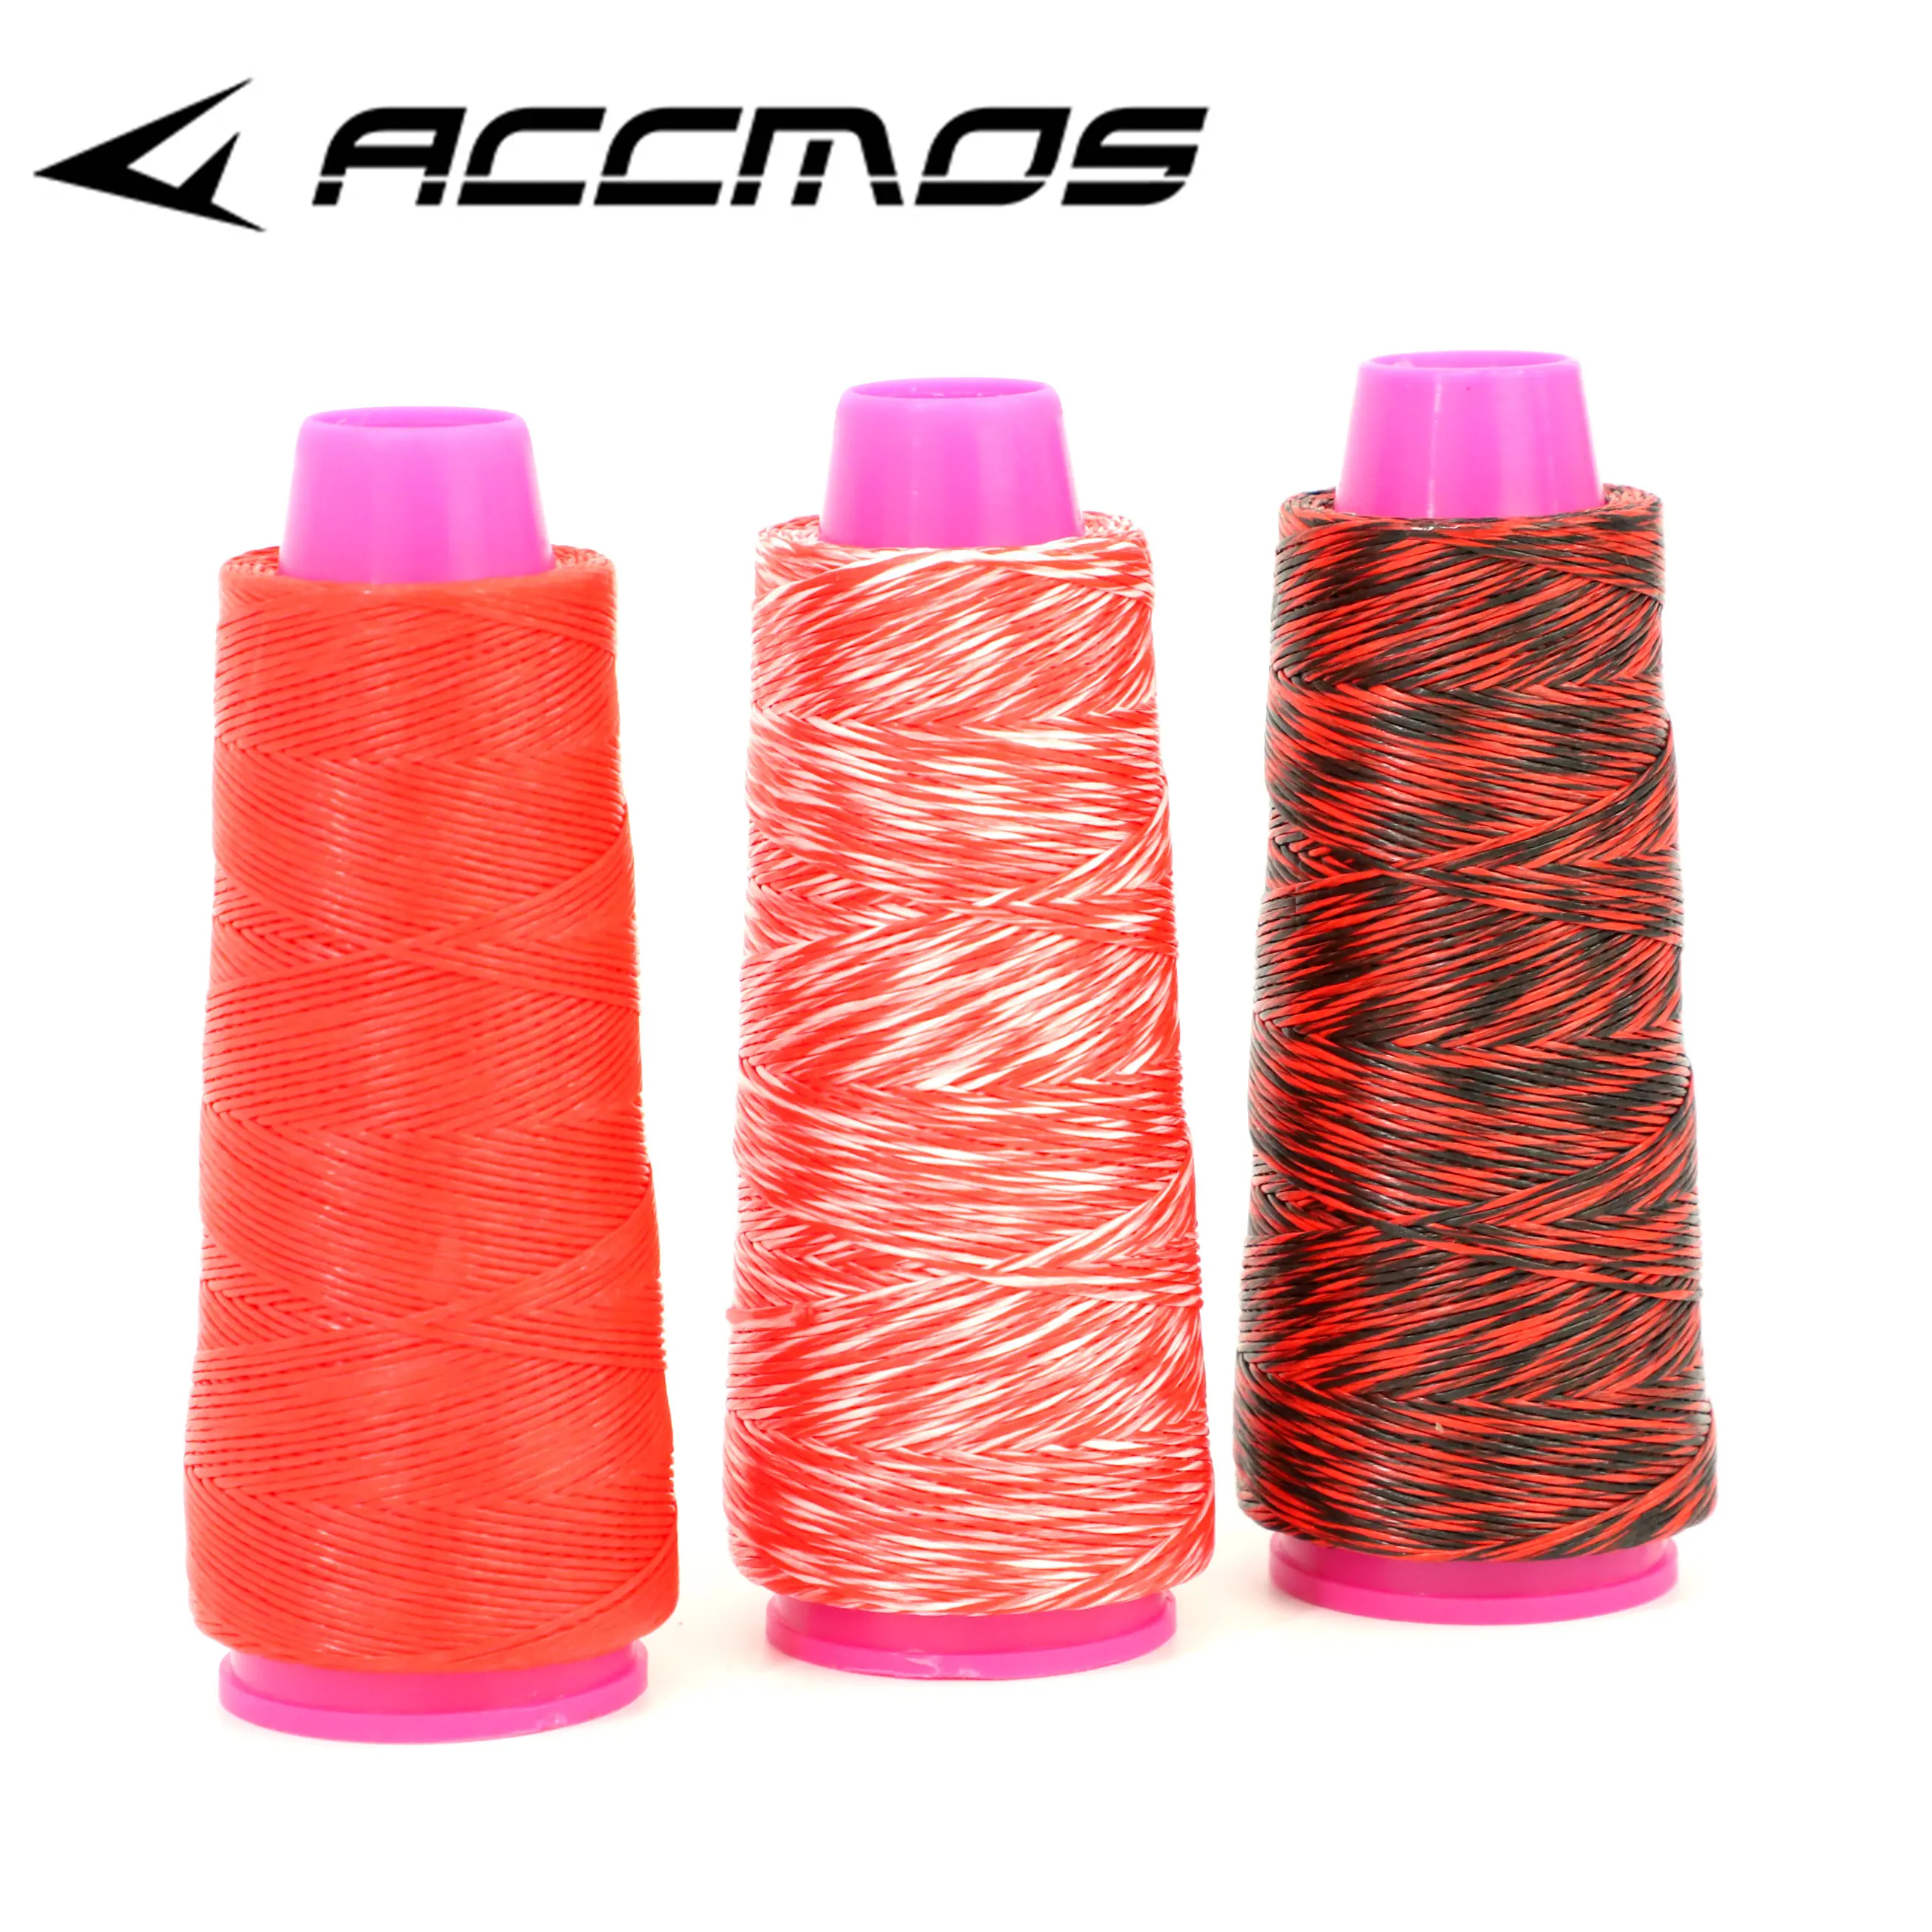 110 Meters/Roll Archery Bowstring Material Diameter 0.8mm 1600 Polyethylene  Fiber DIY Recurve and Compound Bow String